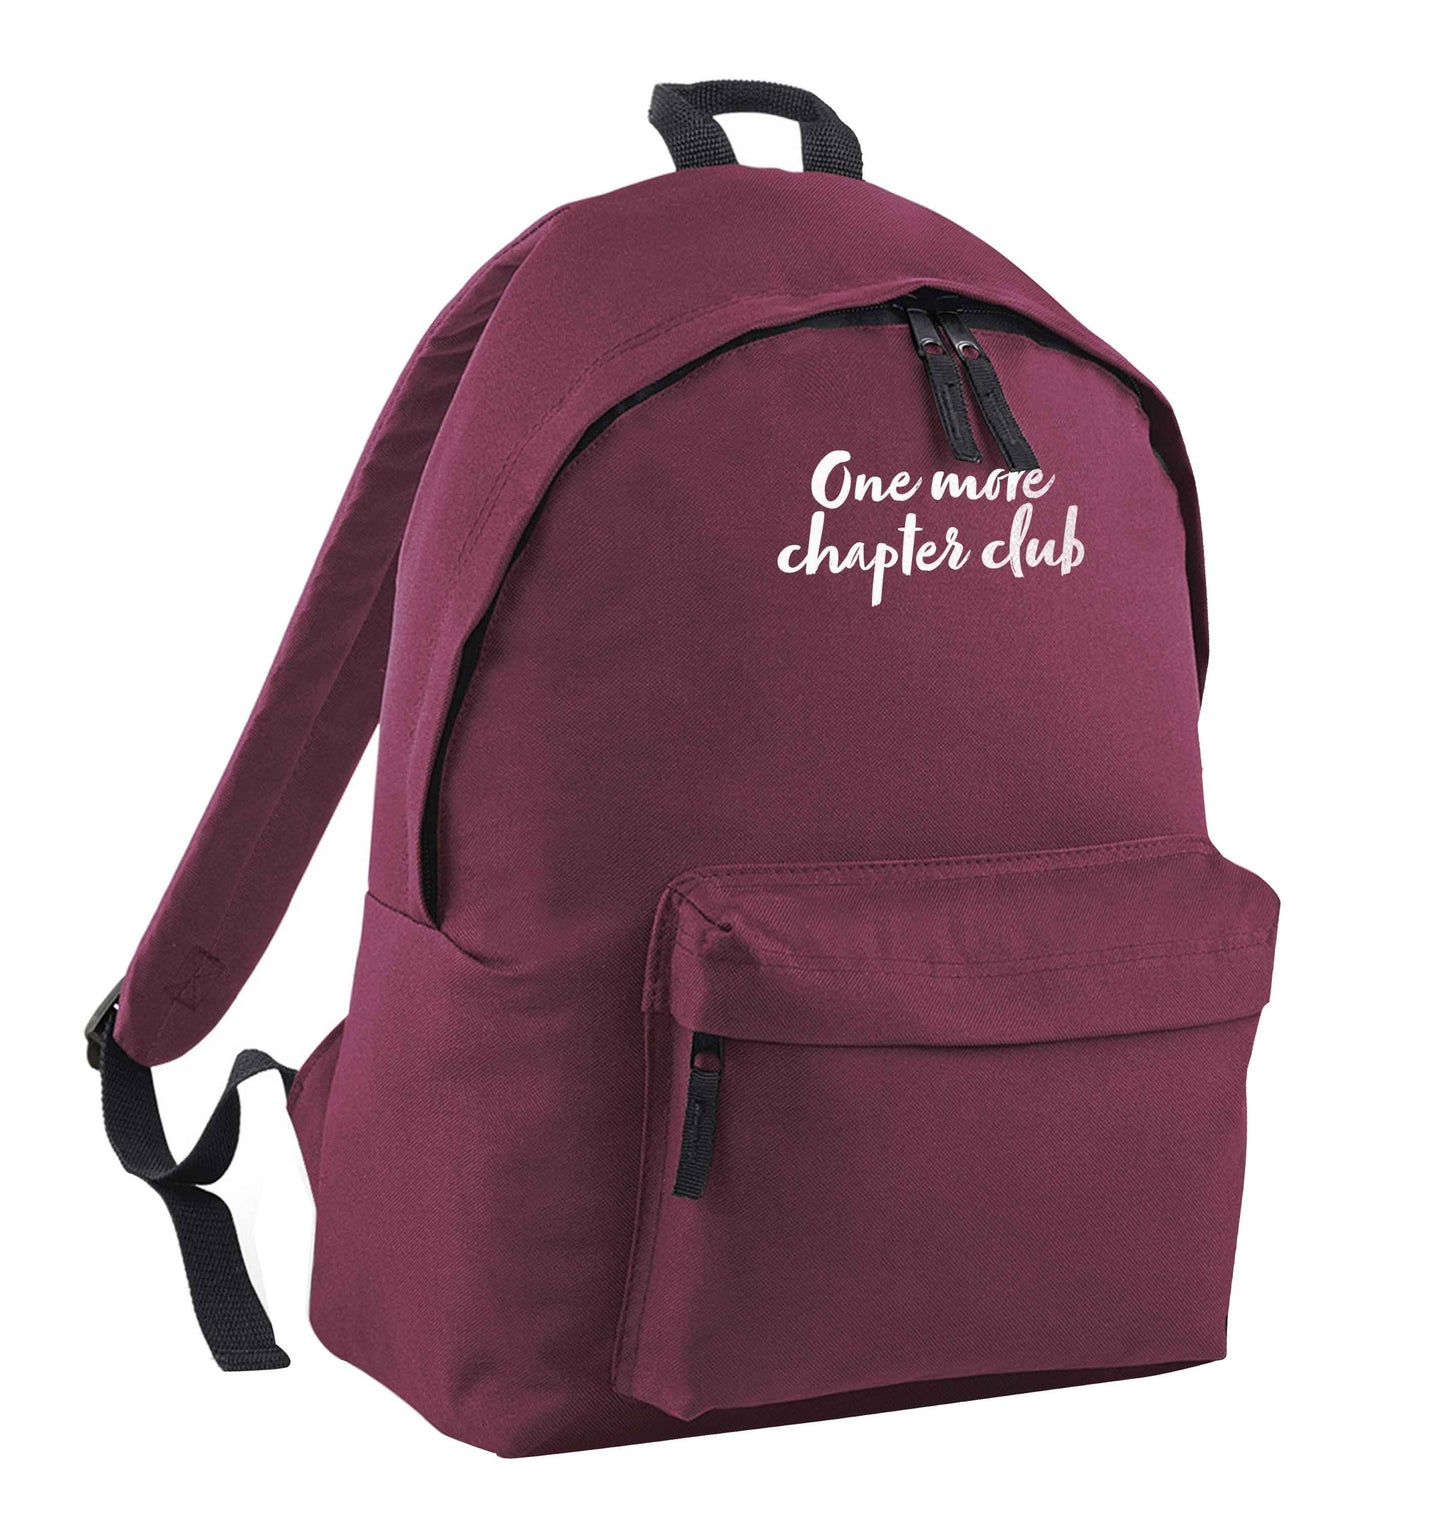 One more chapter club Kit maroon children's backpack